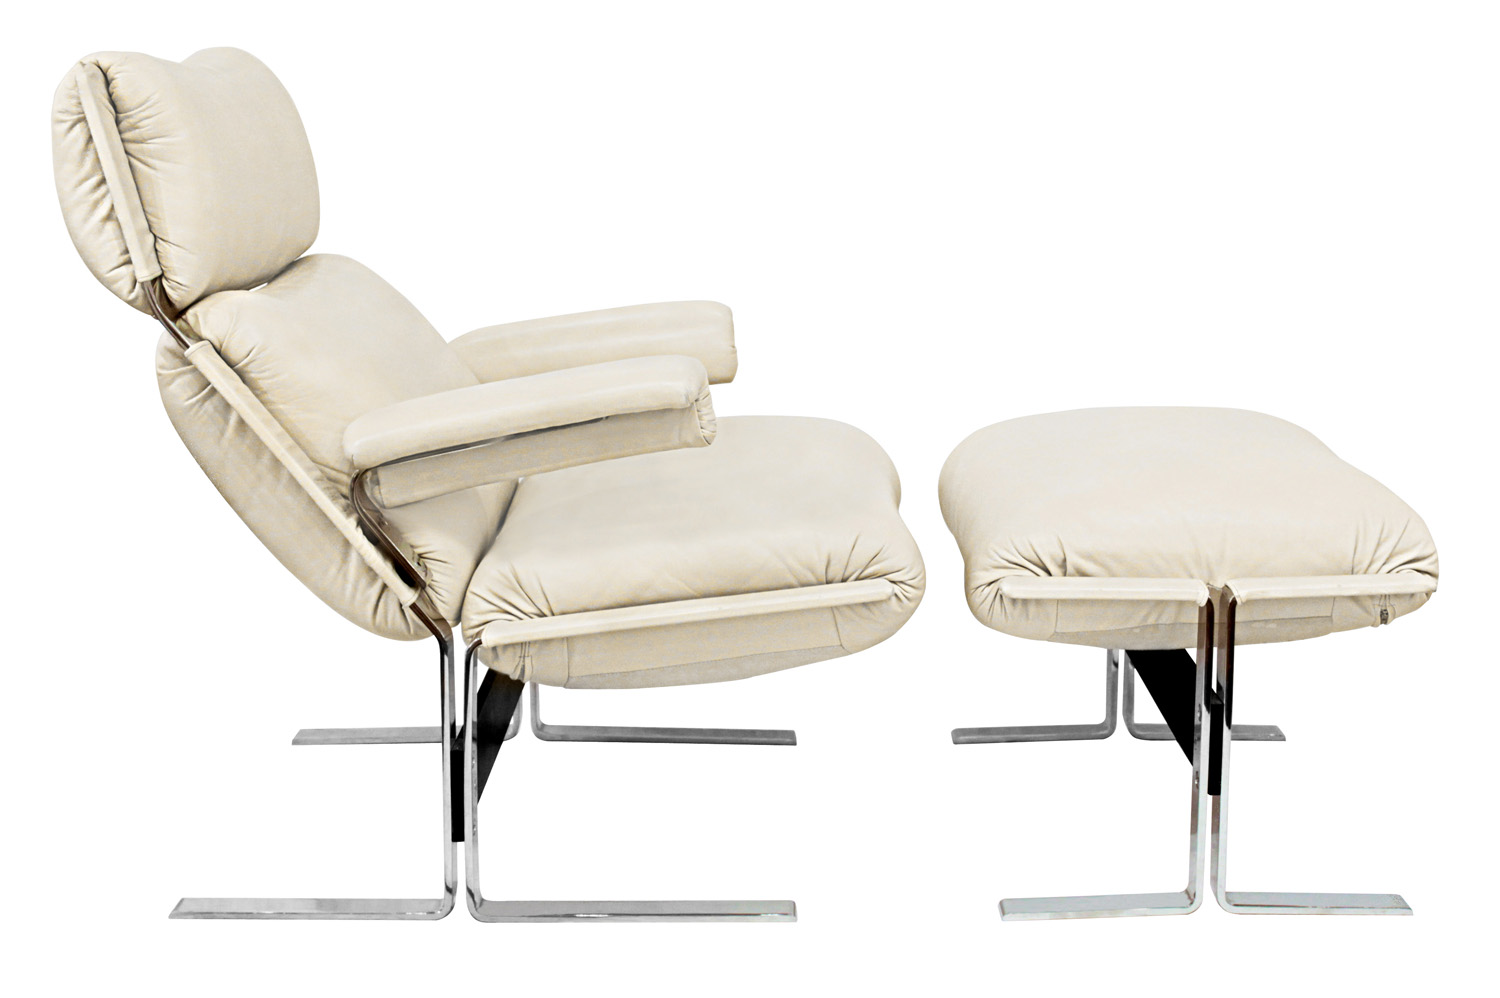 Saporiti 75 steel and leather chair&ottoman47 detail1 hires.jpg